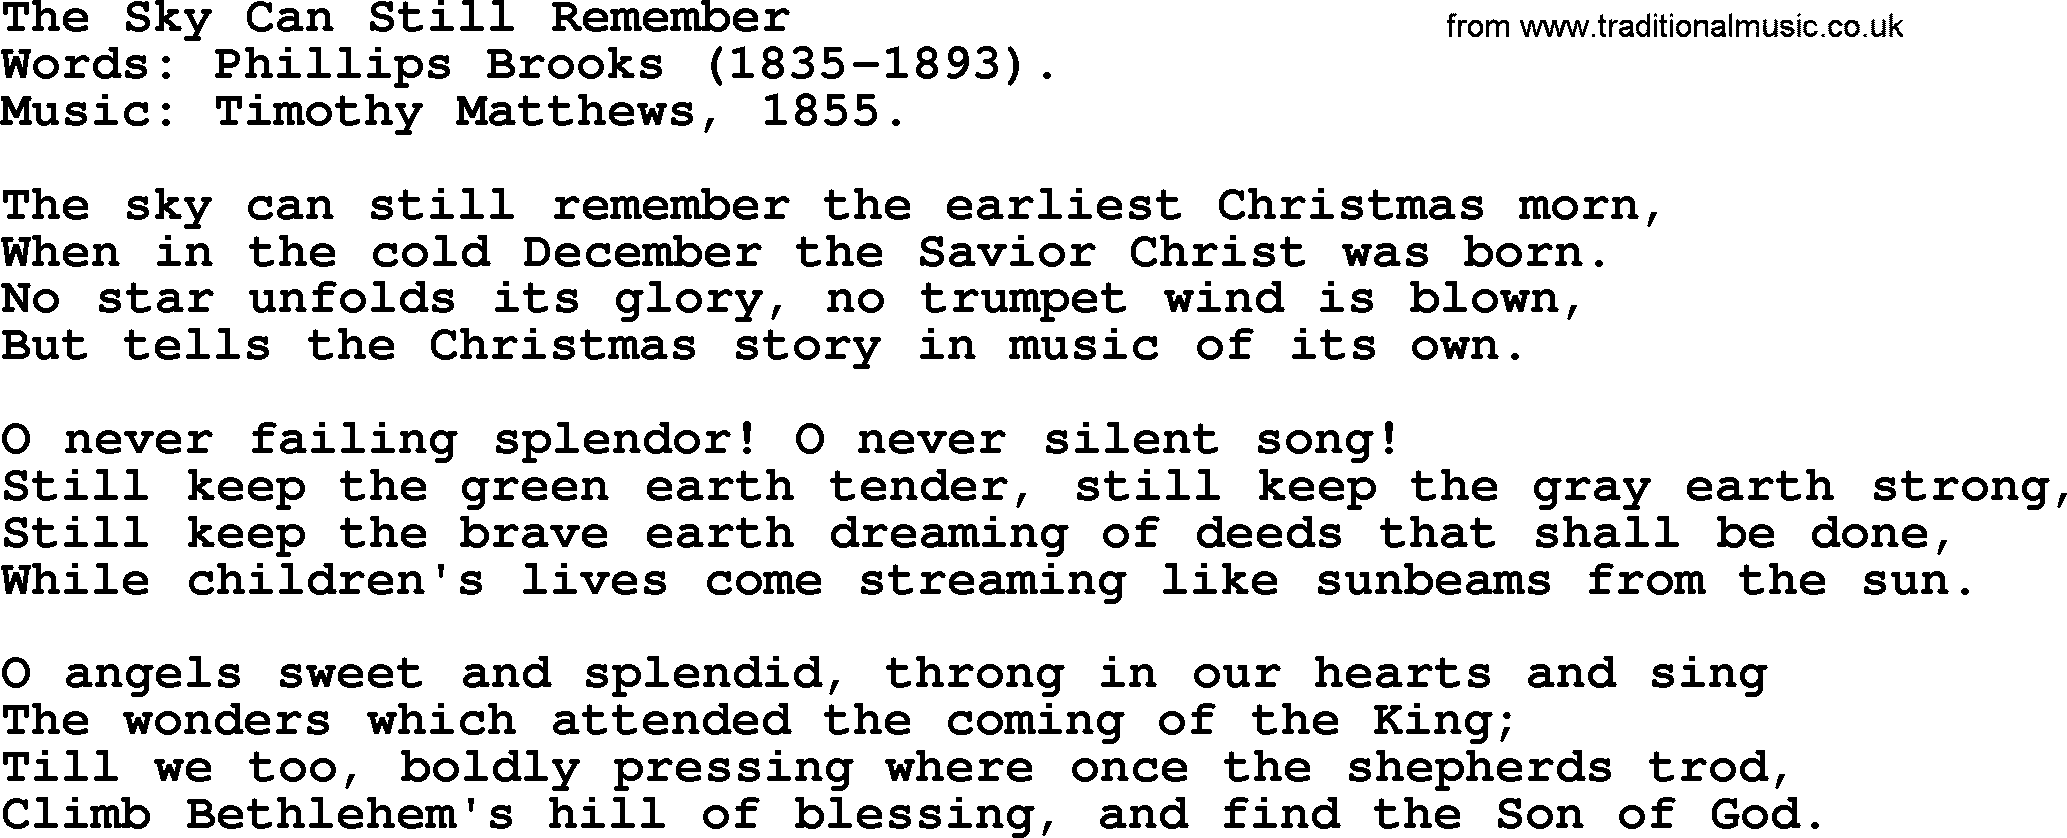 Christmas Hymns, Carols and Songs, title: The Sky Can Still Remember, lyrics with PDF